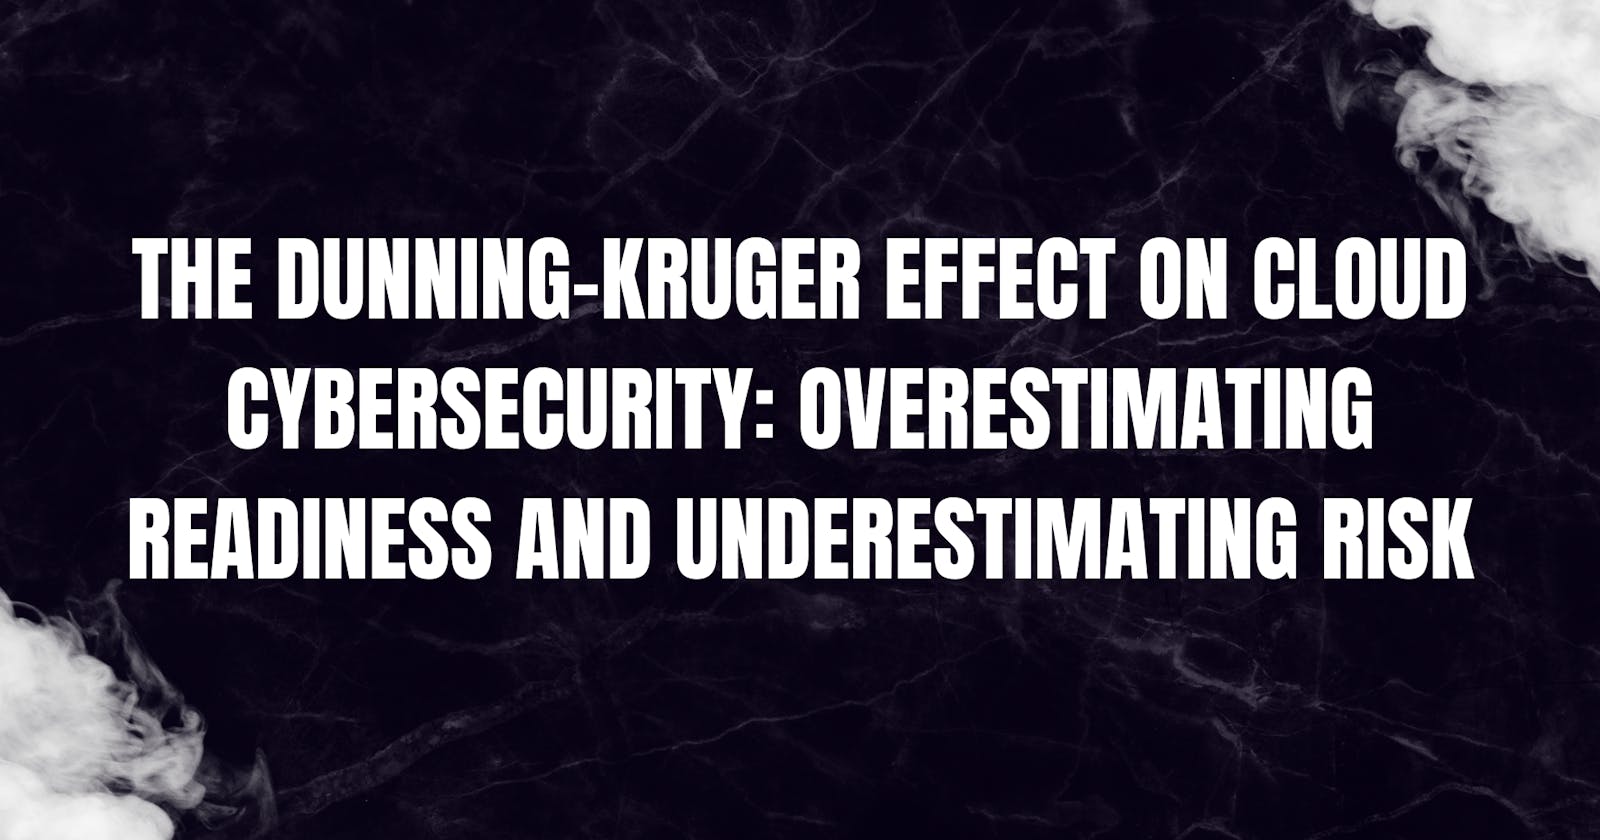 The Dunning-Kruger Effect on Cloud Security: Overestimating Readiness and Underestimating Risk